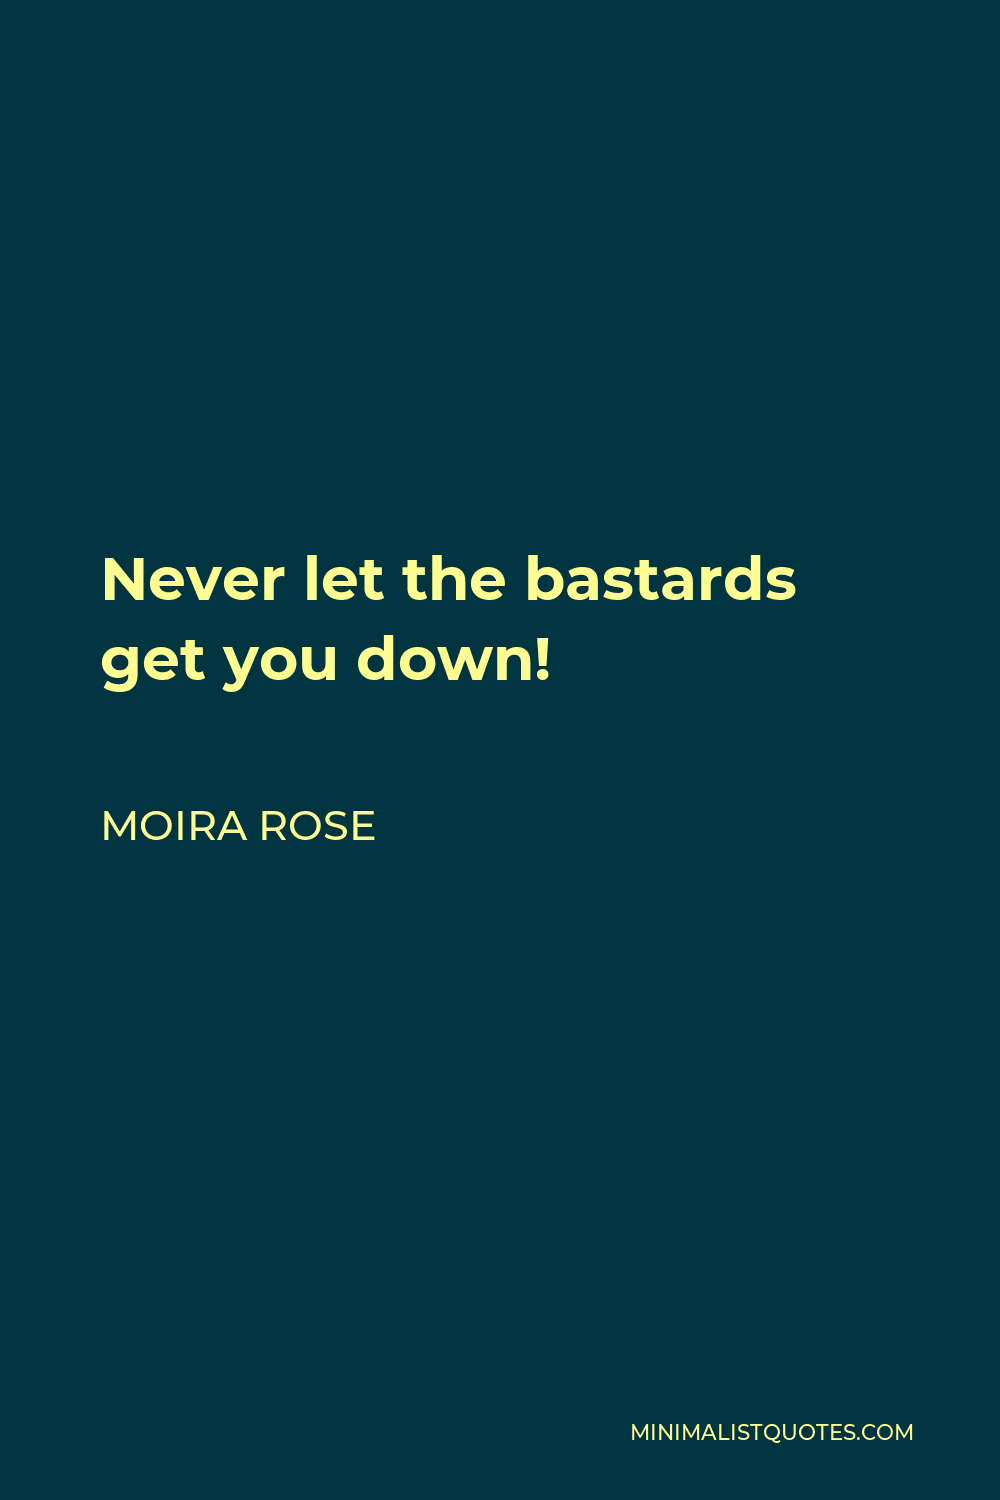 Moira Rose Quote - Never let the bastards get you down!